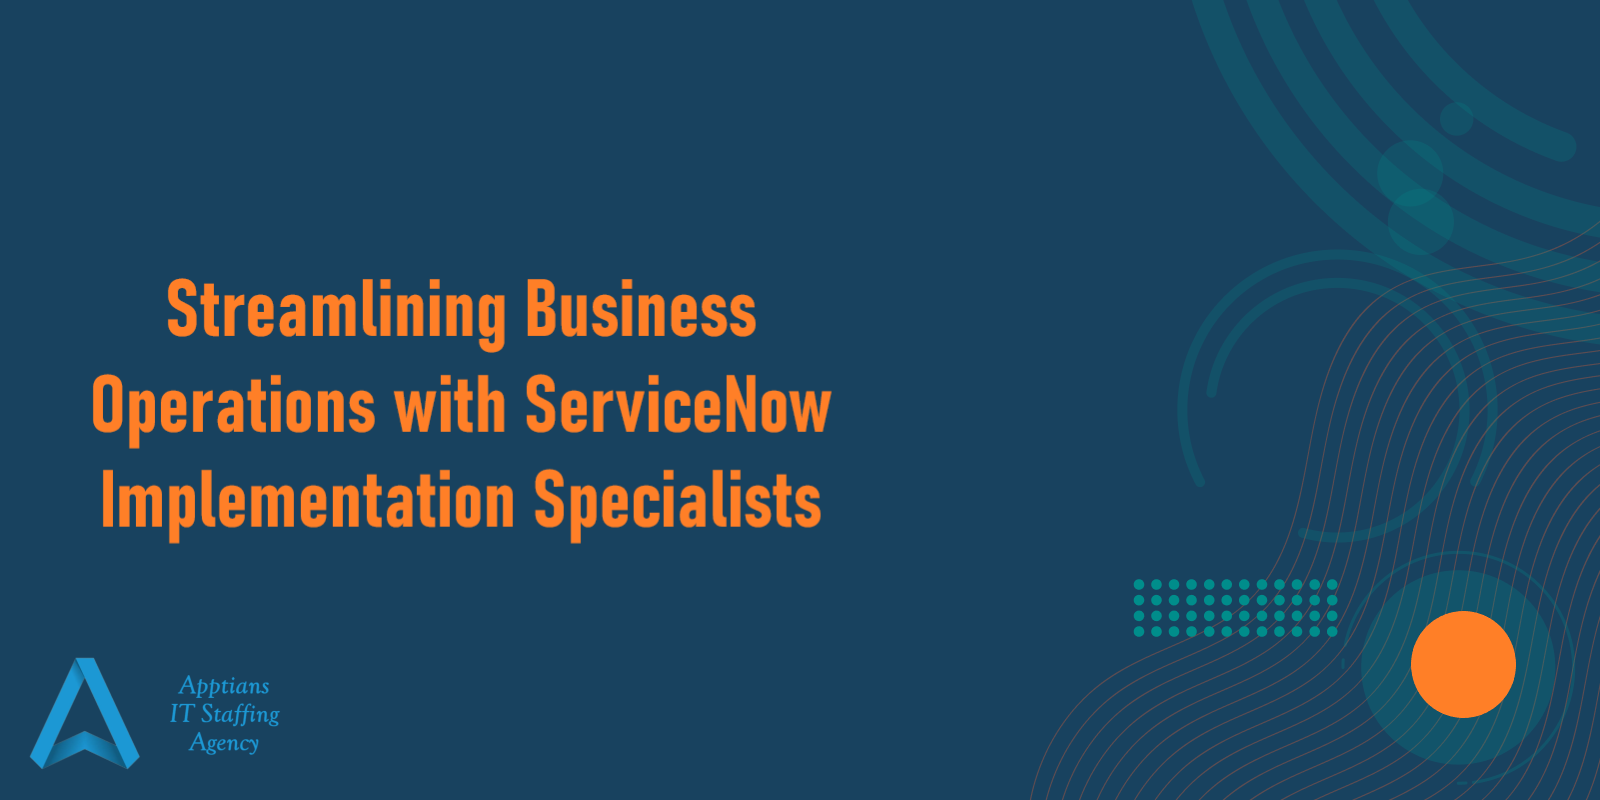 Streamlining Business Operations with ServiceNow Implementation Specialists